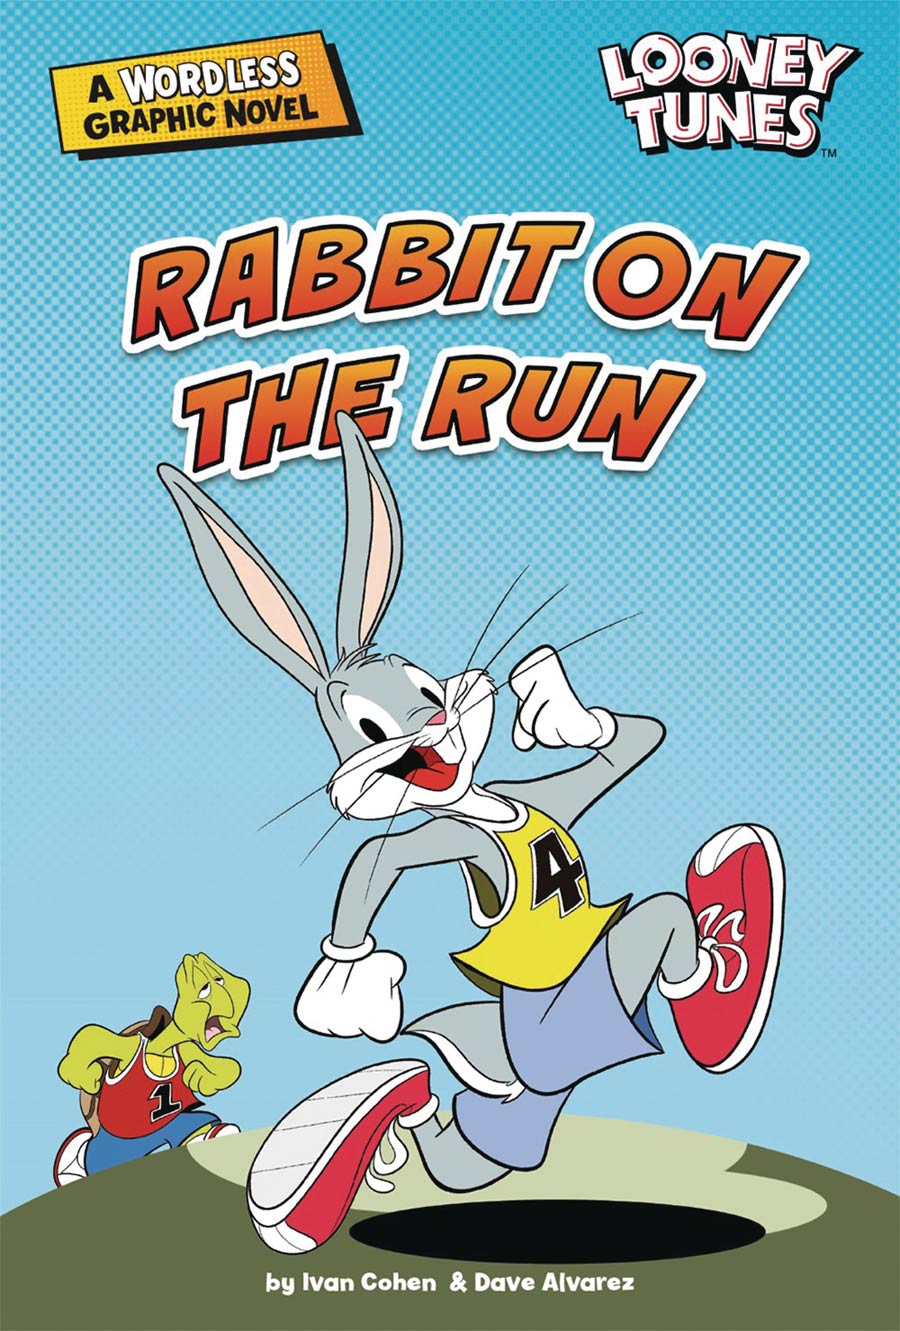 Looney Tunes A Wordless Graphic Novel Rabbit On The Run TP